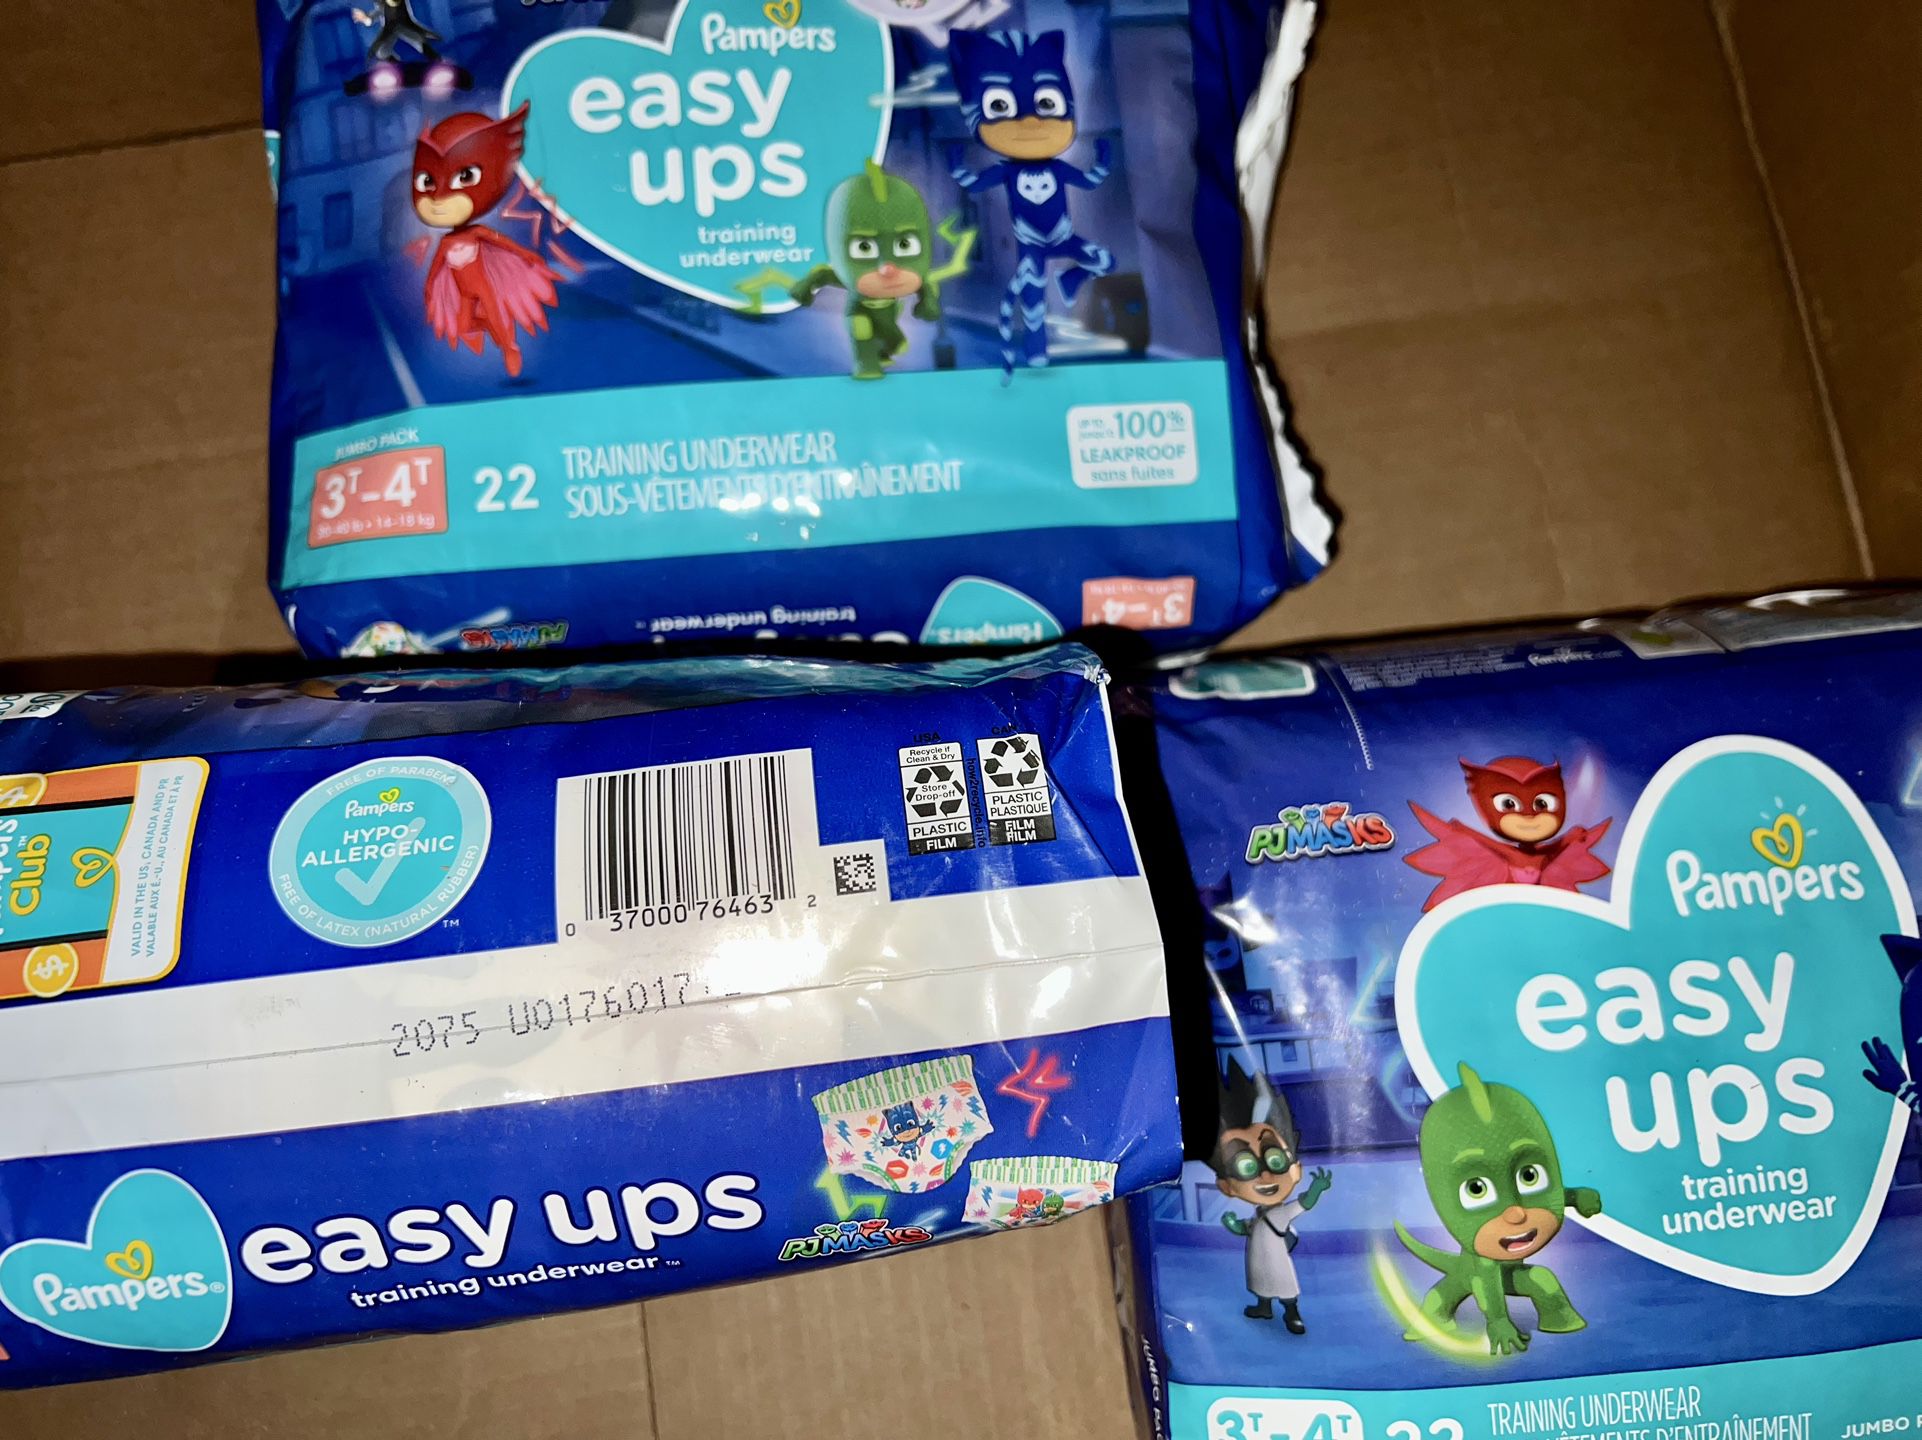 3 bags Pampers Easy Ups Training Underwear Boys Size 5 3T-4T 22 Count